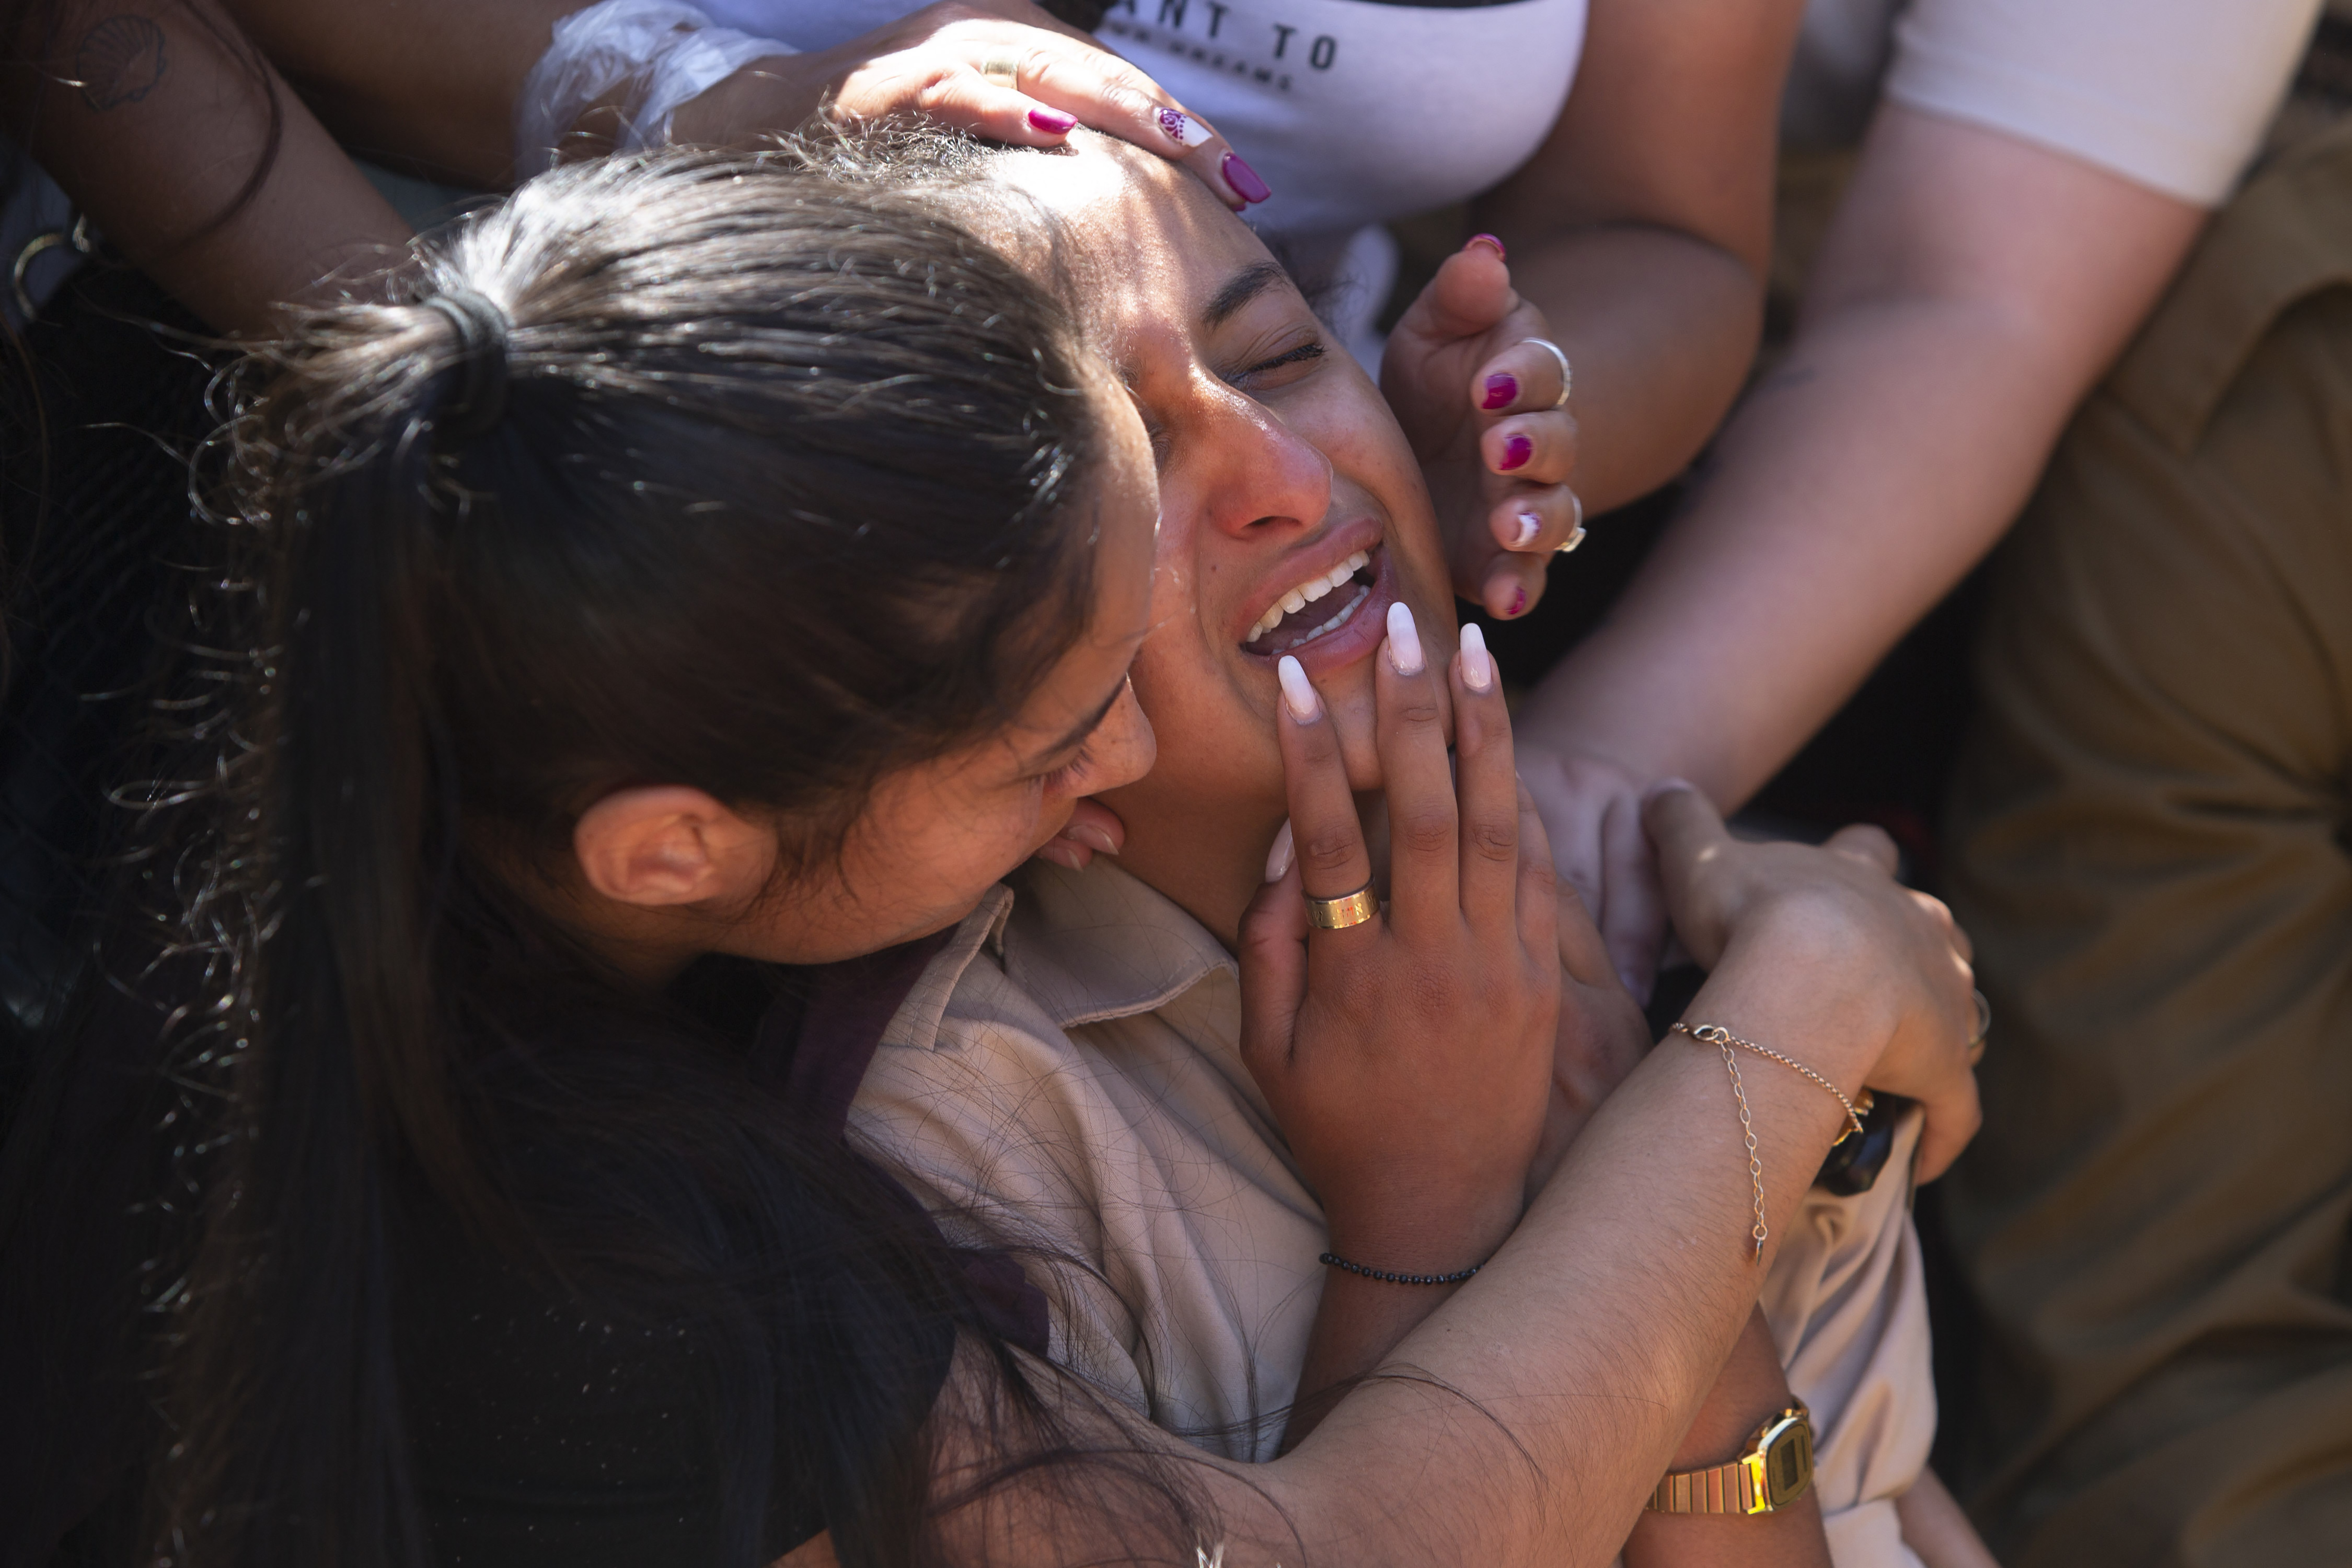 Friends and relatives of Israeli soldier Omer Tabib, 21, mourn during his funeral at the cemetery in the northern Israeli town of Elyakim, Thursday, May 13, 2021. The Israeli army confirmed that Tabib was killed in an anti-tank missile attack near the Gaza Strip, the first Israeli military death in the current fighting between Israelis and Palestinians. (AP Photo/Sebastian Scheiner)